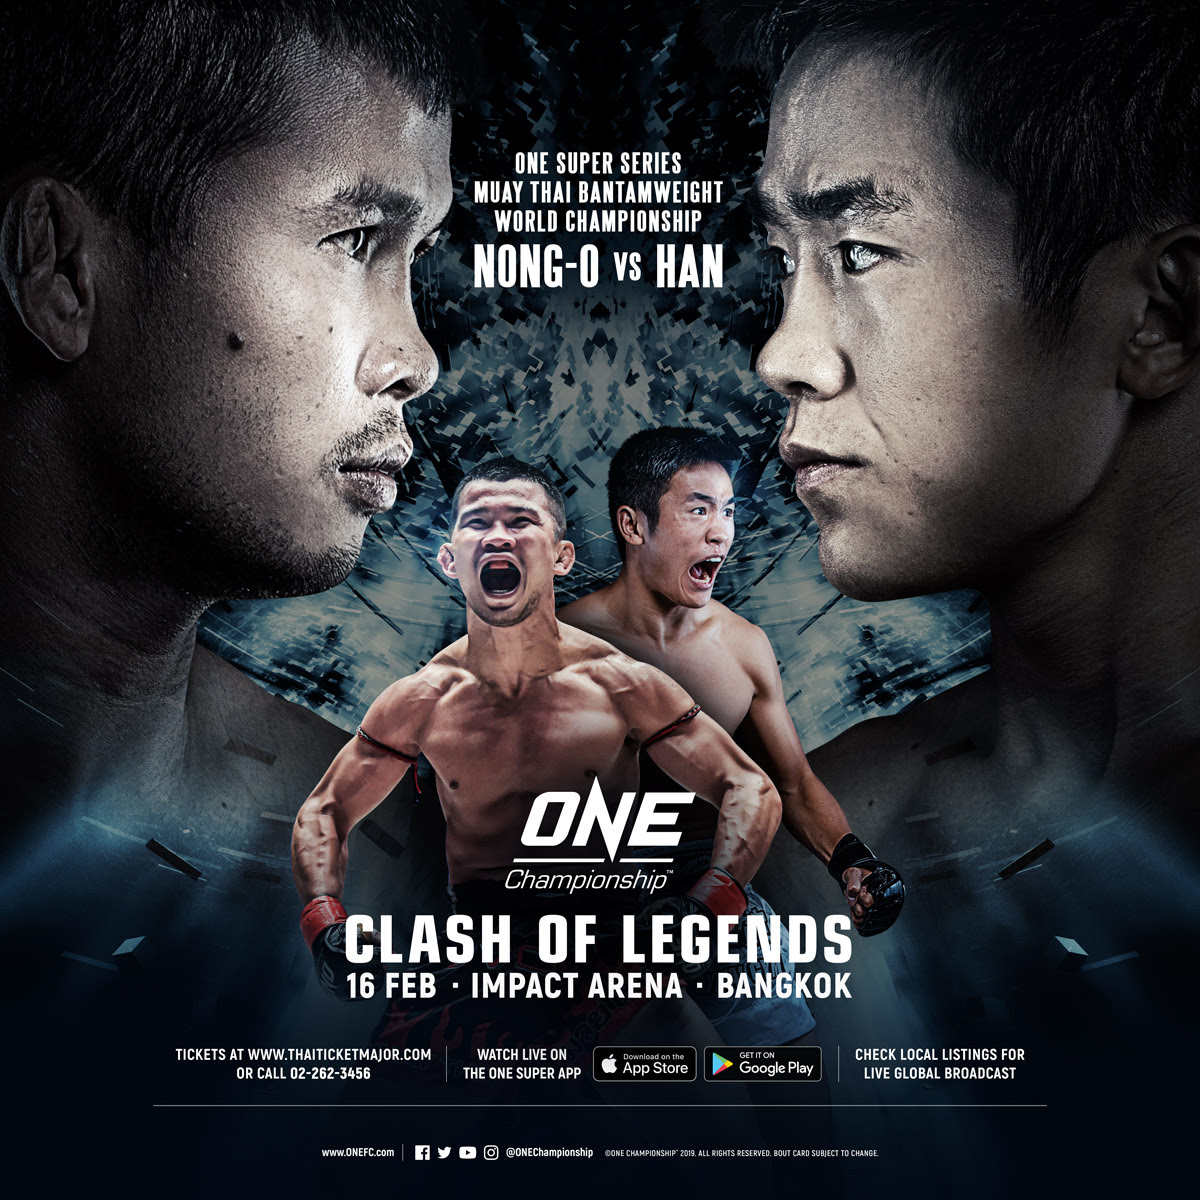 Nong-O Gaiyanghadao, Han Zi Hao to headline 'ONE: Clash of Legends' in Thailand for ONE Muay Thai belt